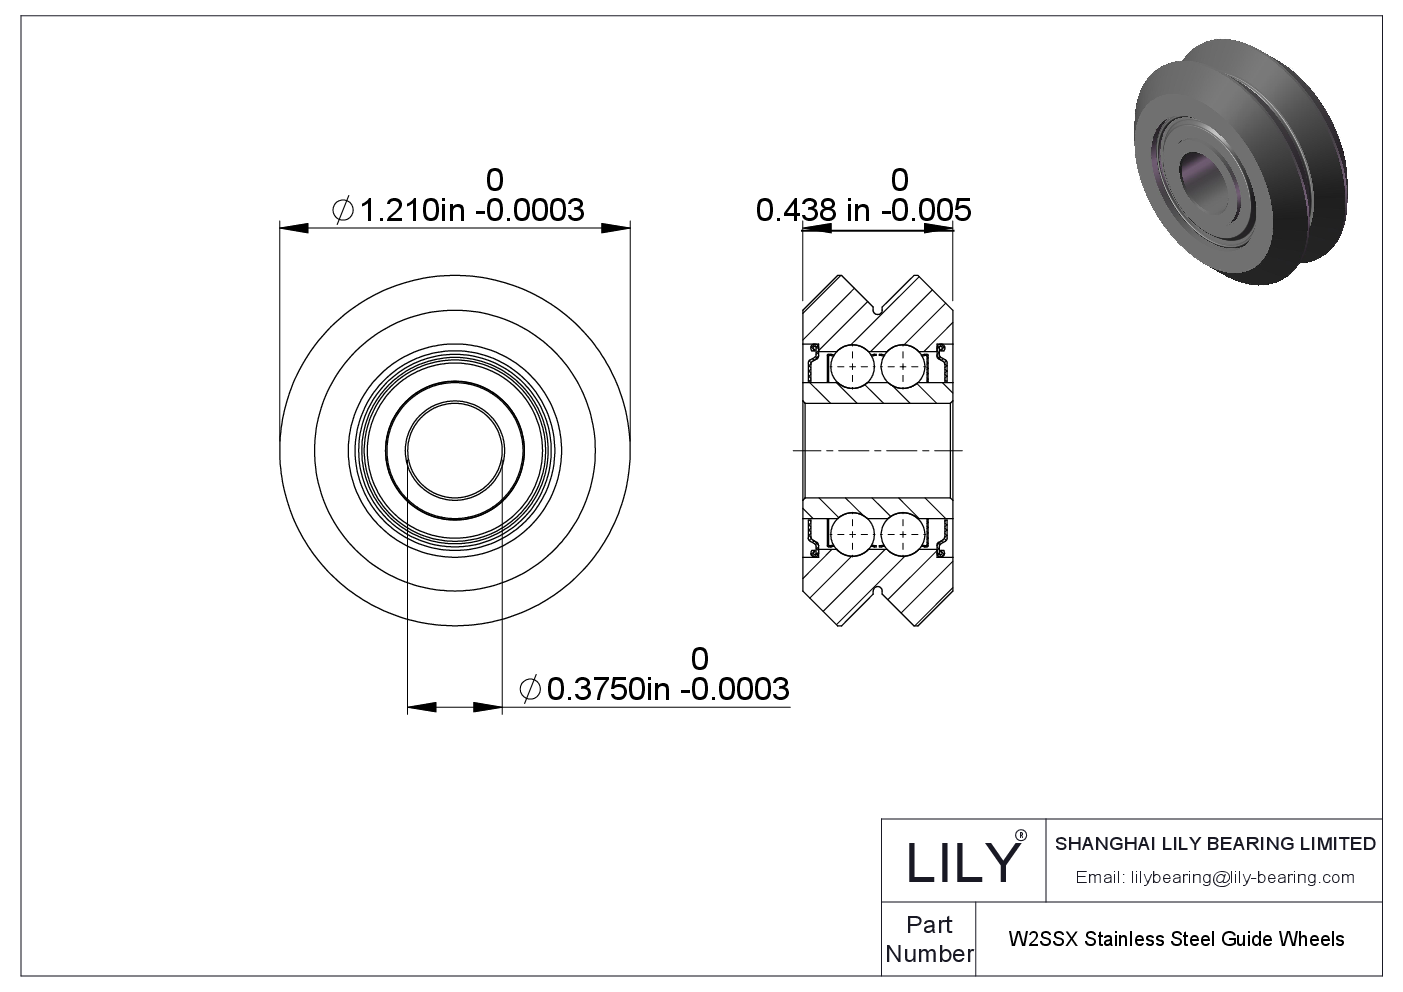 W2SSX Stainless Steel Guide Wheels cad drawing